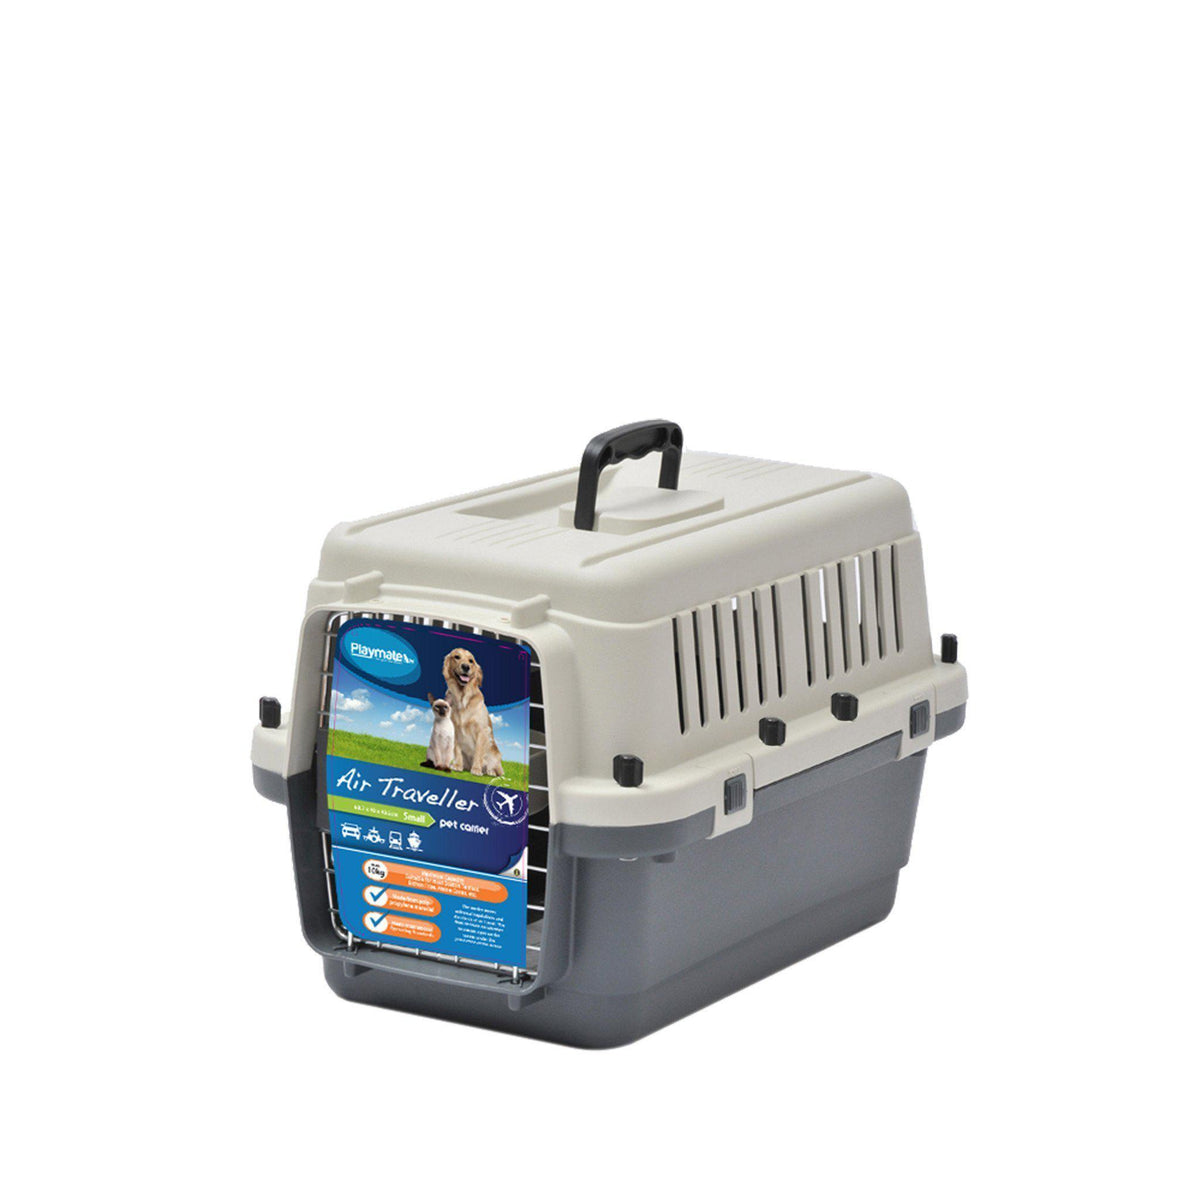 Air Traveller Pet Carrier (Small) - ComfyPet Products